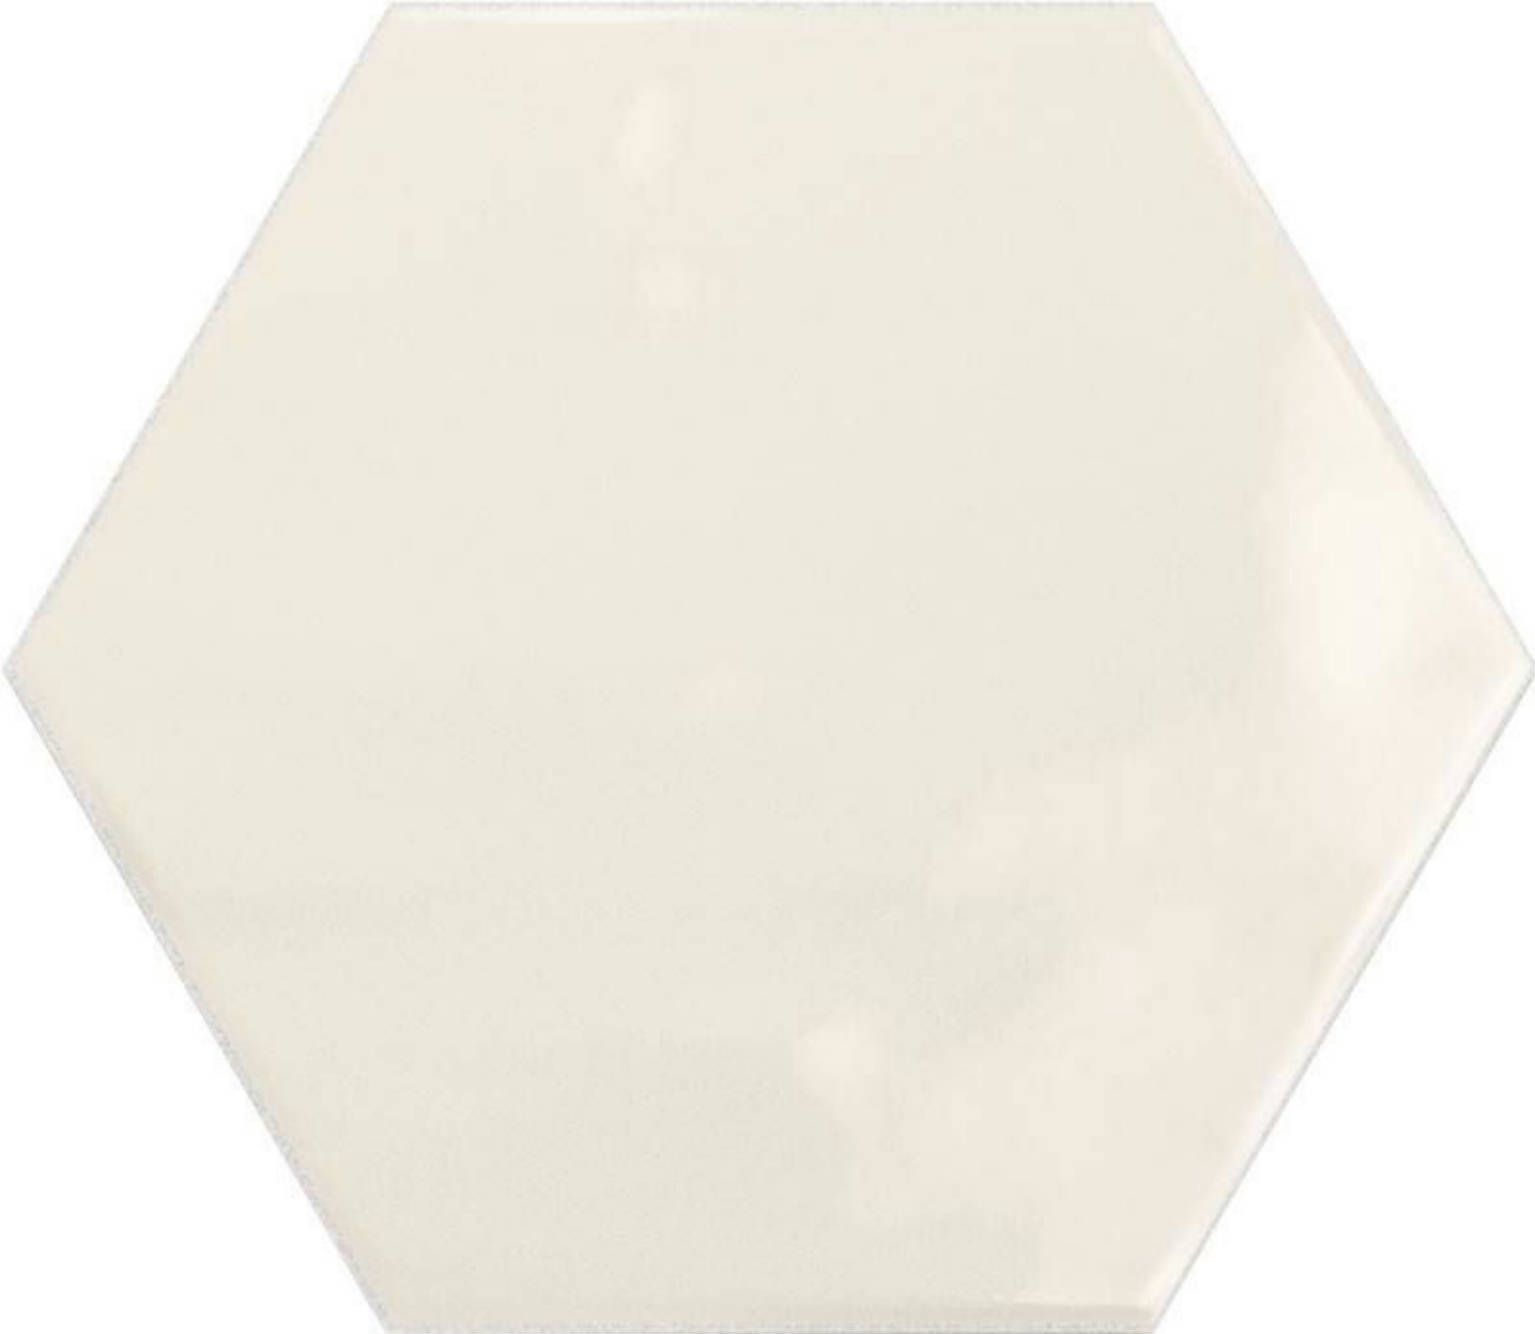 Geometry Hex Ivory | Stones & More | Finest selection of Mosaics, Glass, Tile and Stone